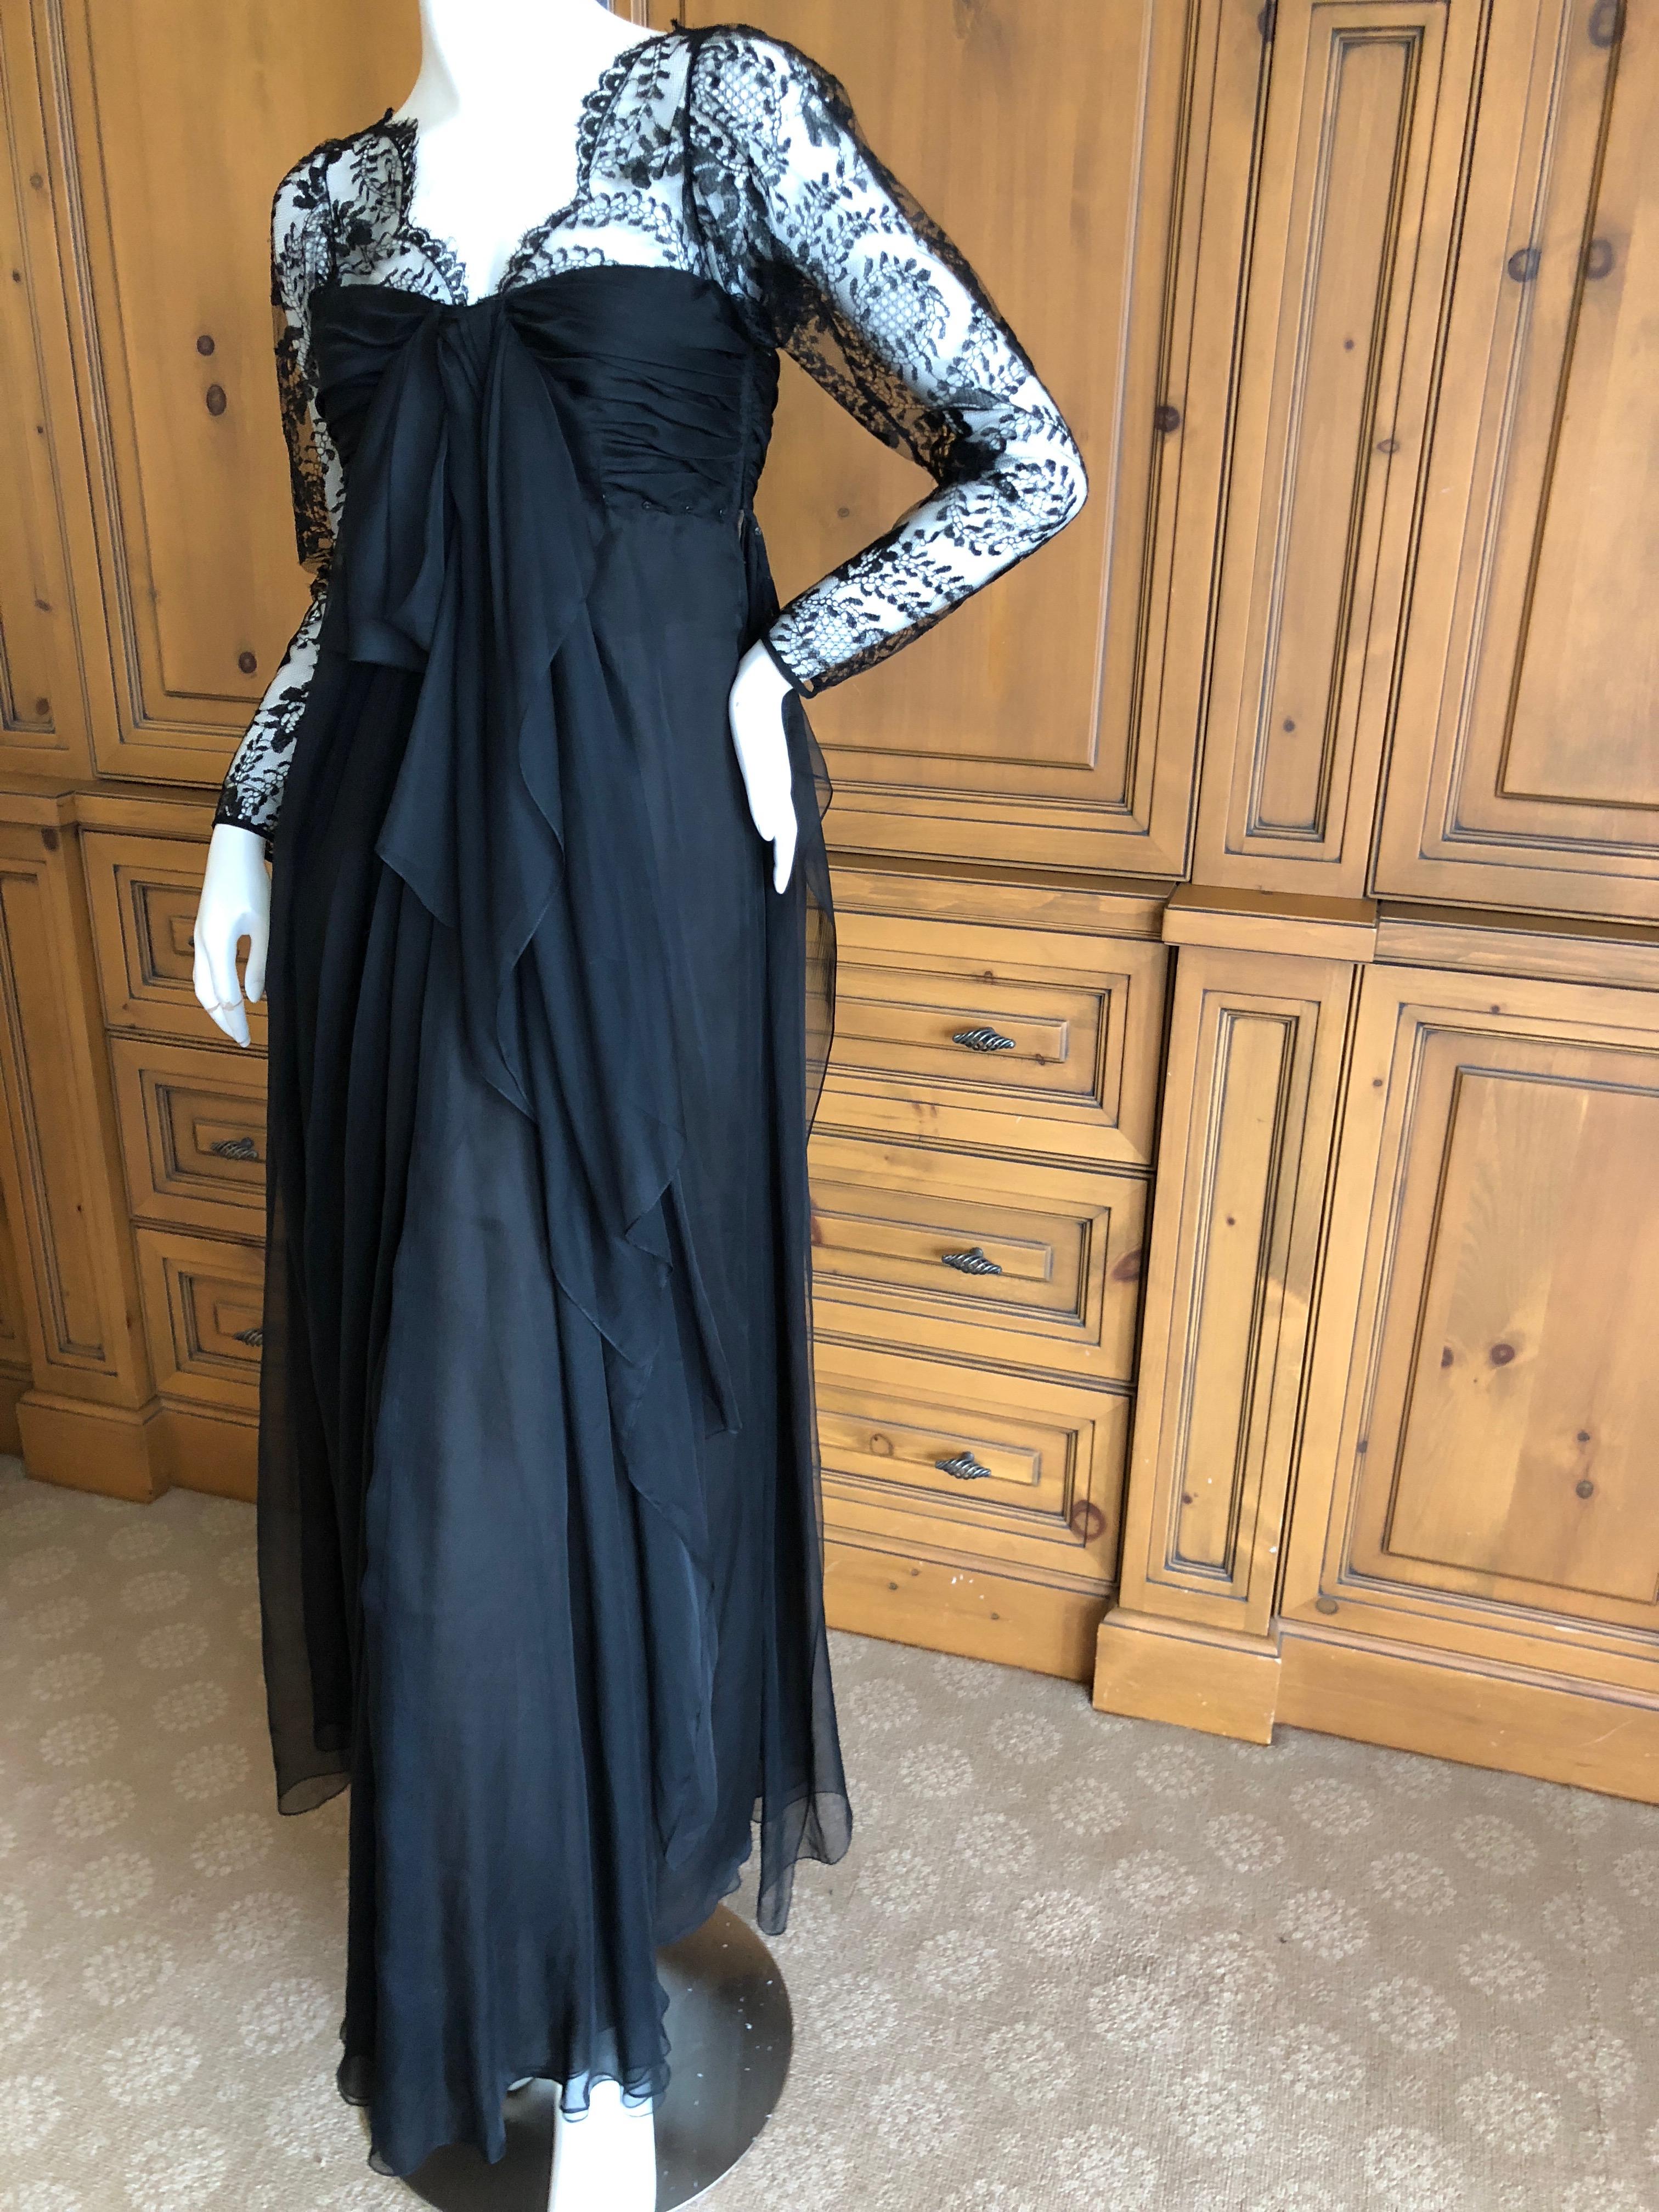 
Yves Saint Laurent Numbered Haute Couture Black Lace Evening Dress.
Draped flou soft tailored tea length evening dress from Yves Saint Laurent Haute Couture circa 1972.
Simply exquisite.
Bust 34